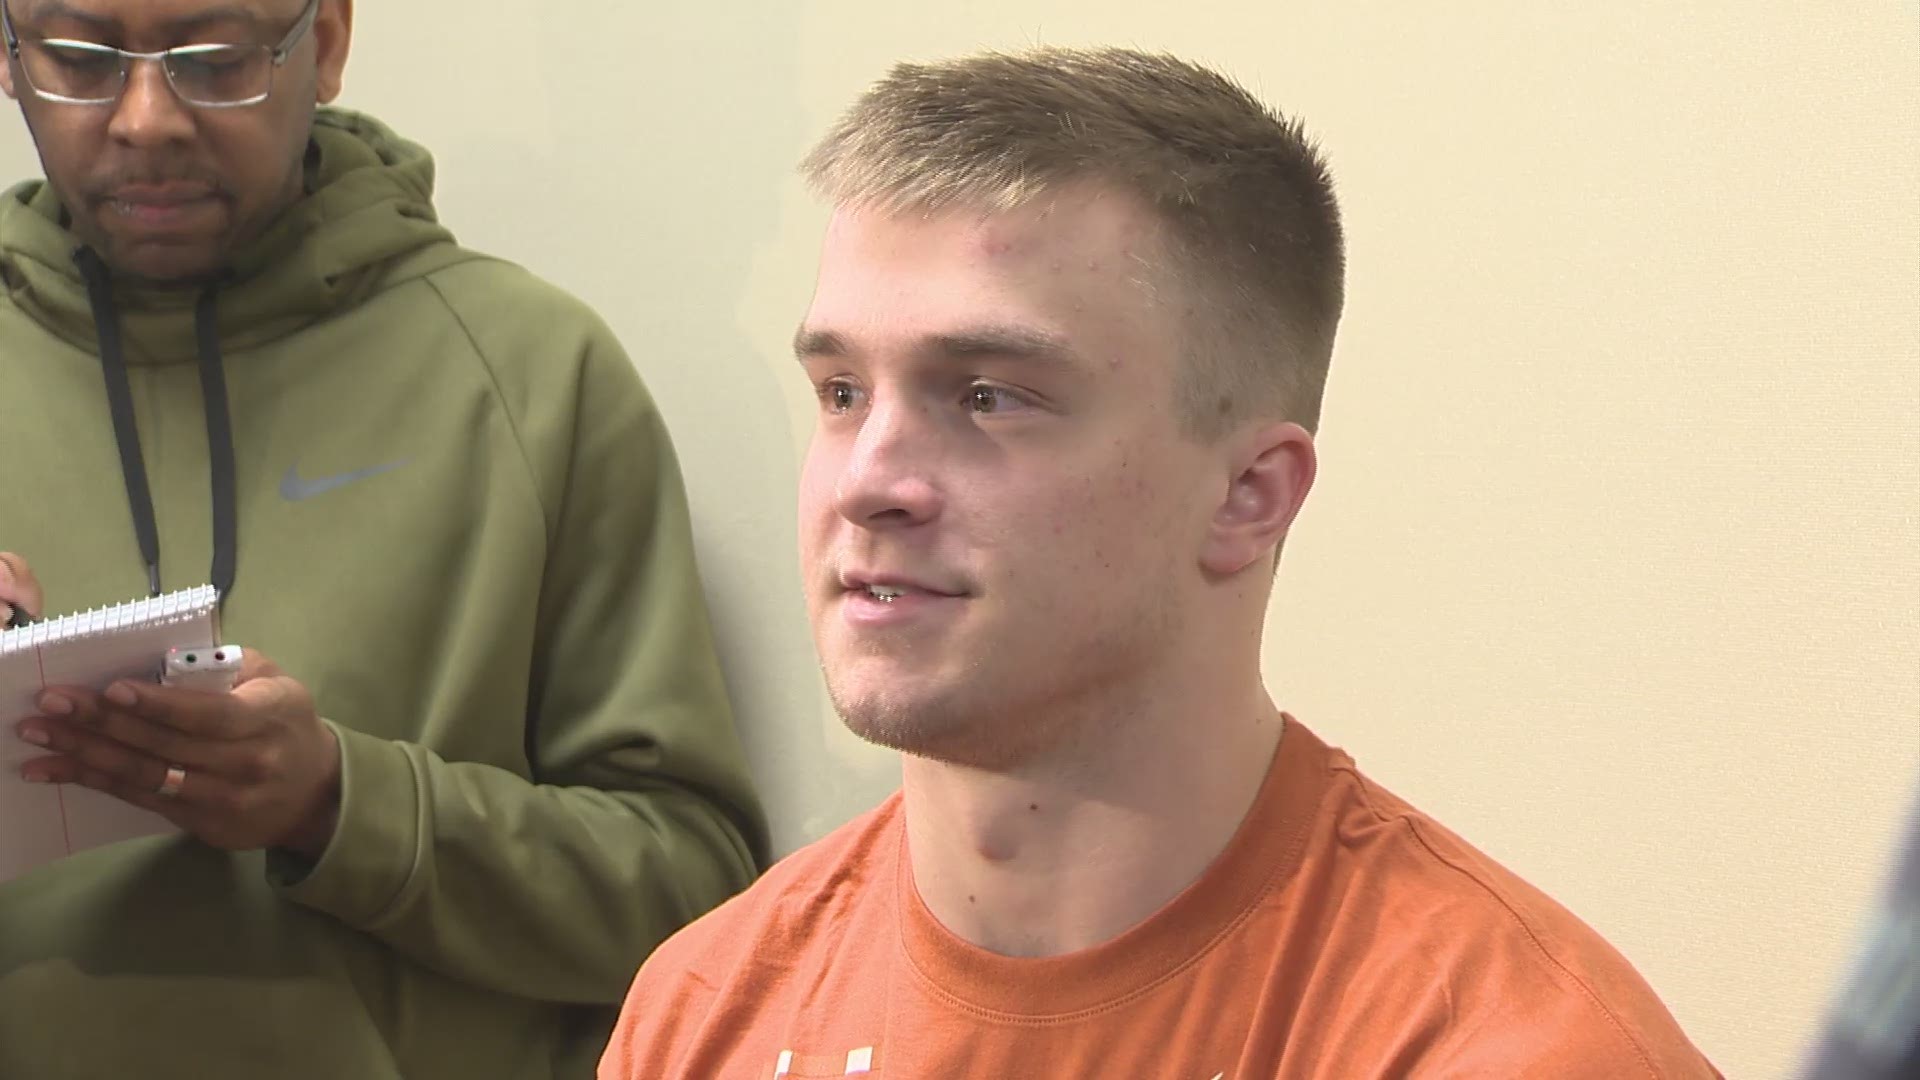 Since Shane Buechele revealed his plans to transfer to SMU, Ehlinger is now the leader of the Longhorn quarterbacks.